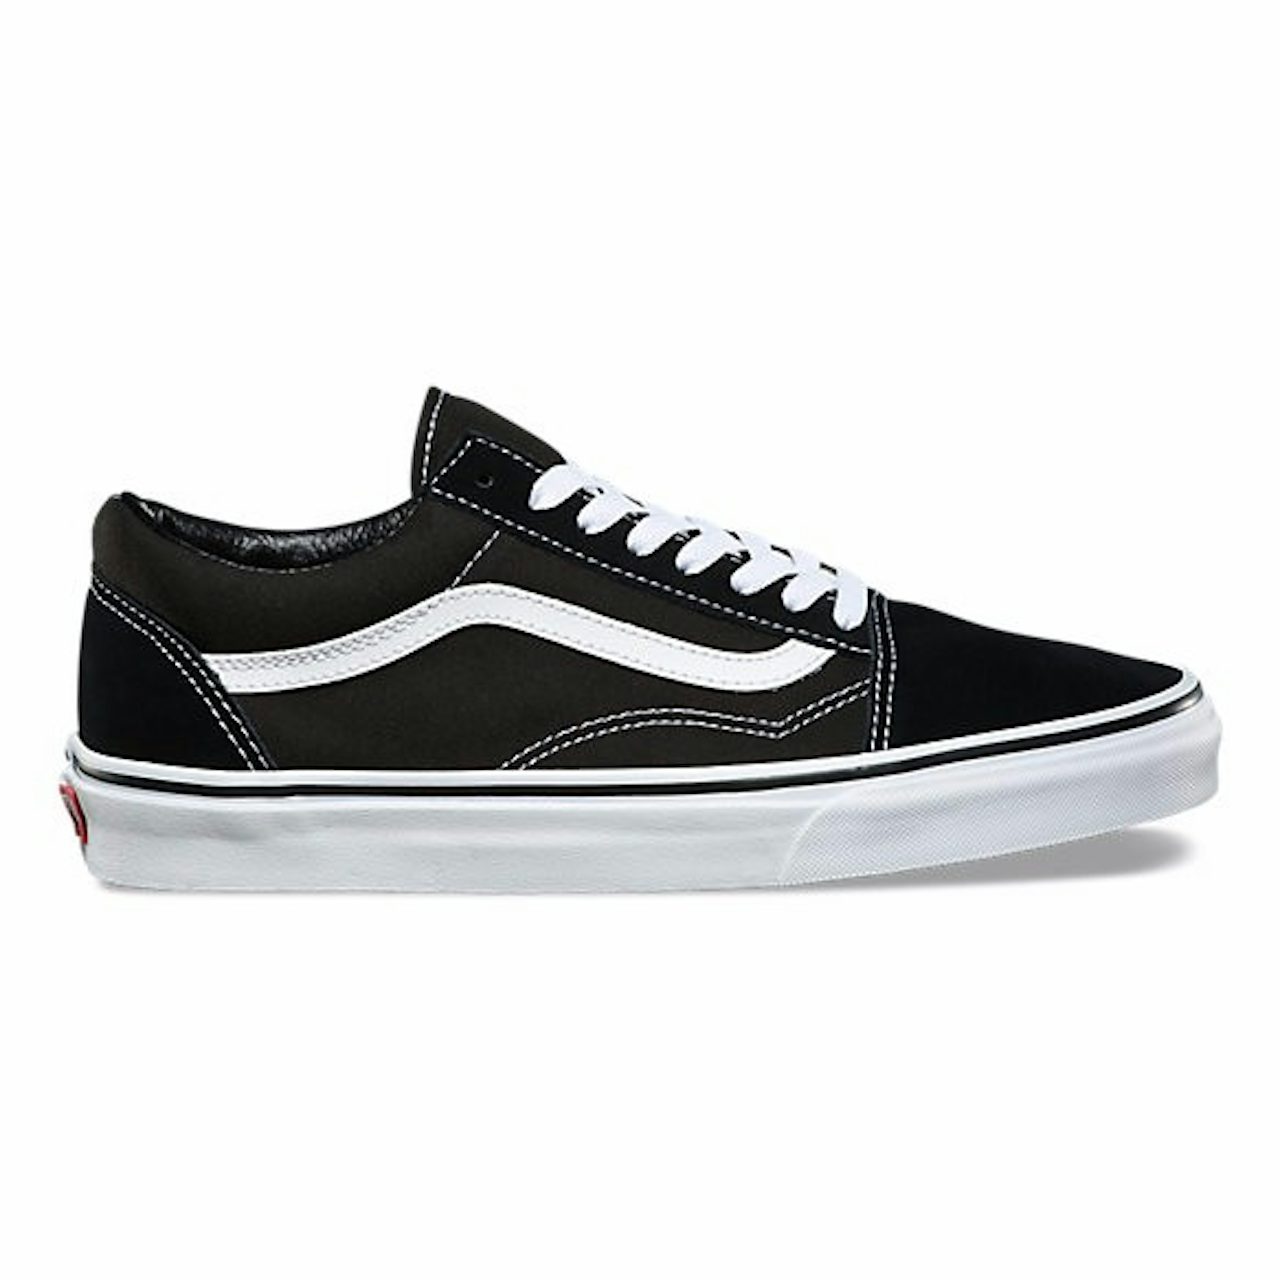 Don’t buy these $200 Vans ripoffs | The Outline